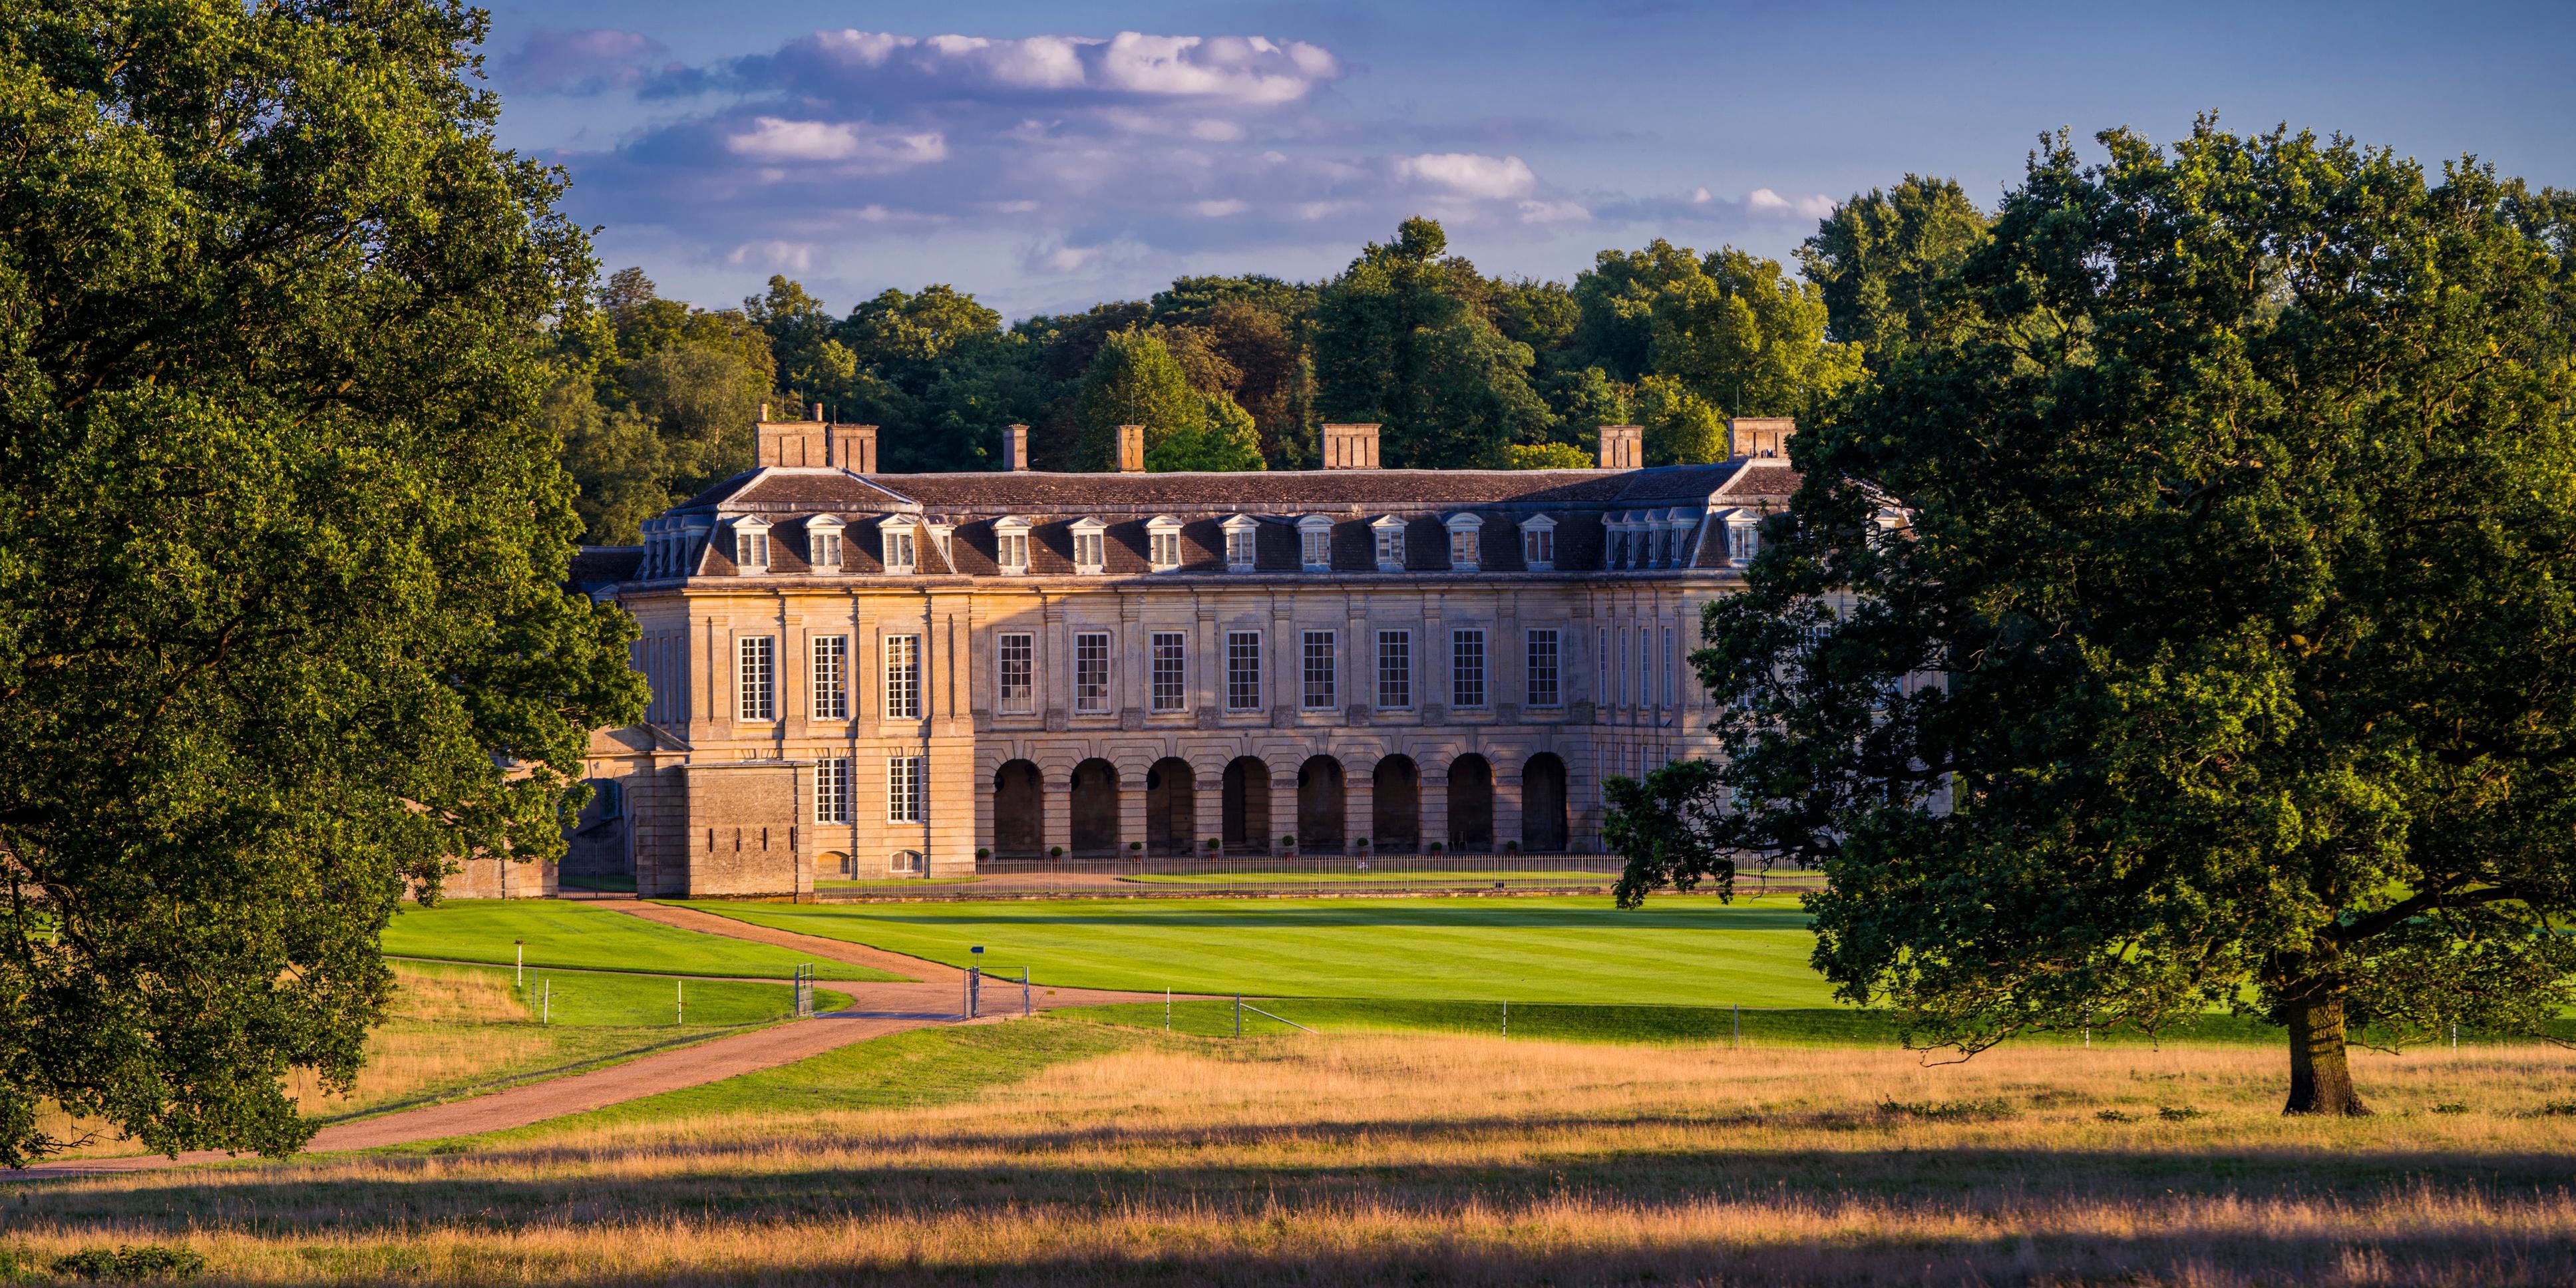 Boughton House, which is well known as the set for Les Miserables and the next Ridley Scott movie Napoleon, is conveniently close to the hotel, just 1.9 miles away and is also home to the annual Greenbelt Festival. They often have outdoor cinema events on during the summer months.